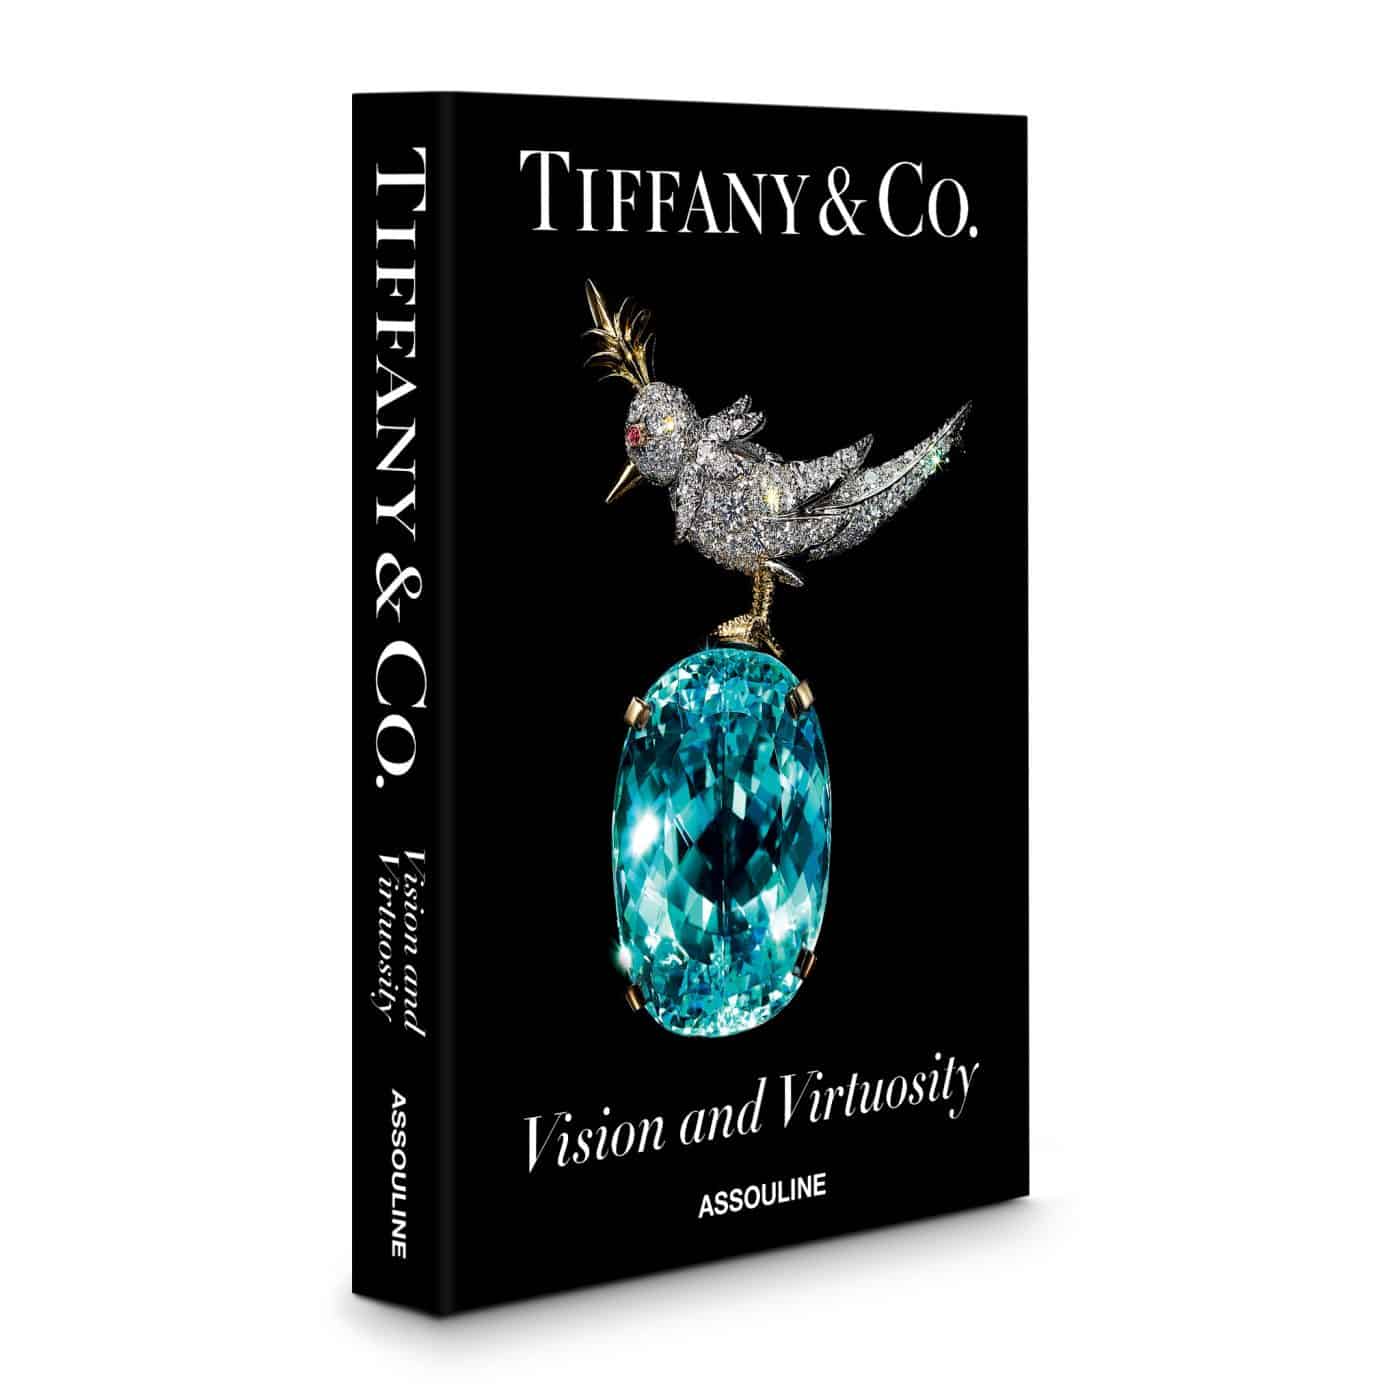 Tiffany & Co. Vision and Virtuosity by Assouline